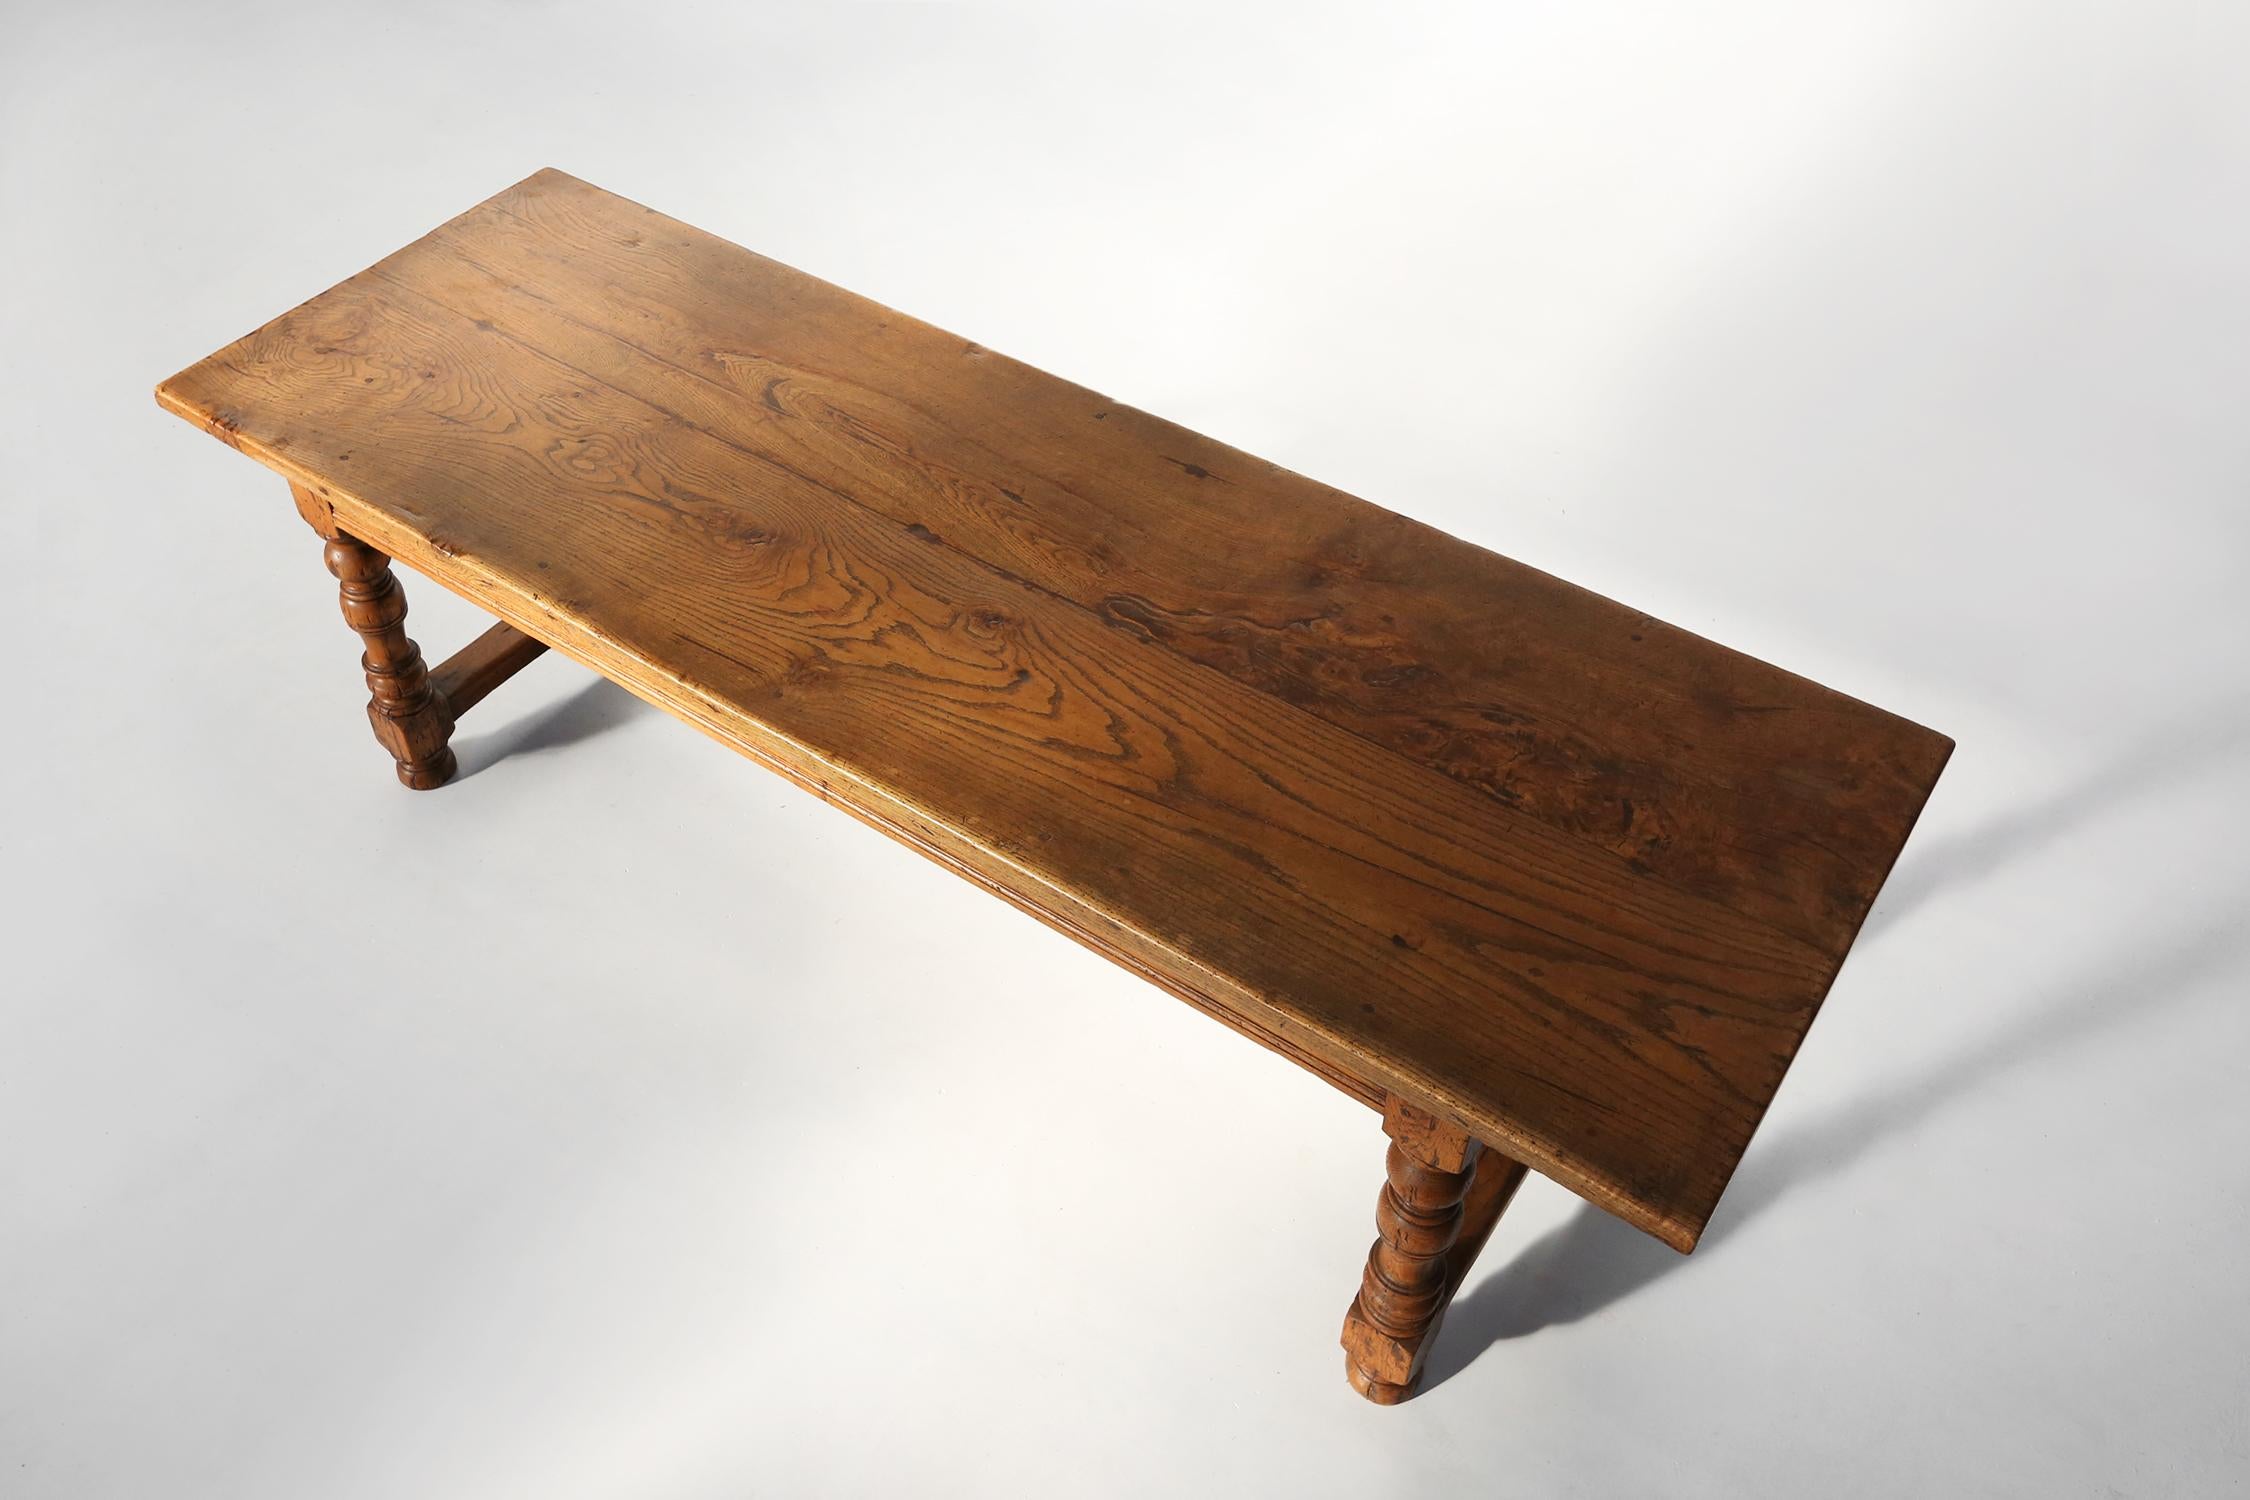 Rustic French 18th century oak dining table